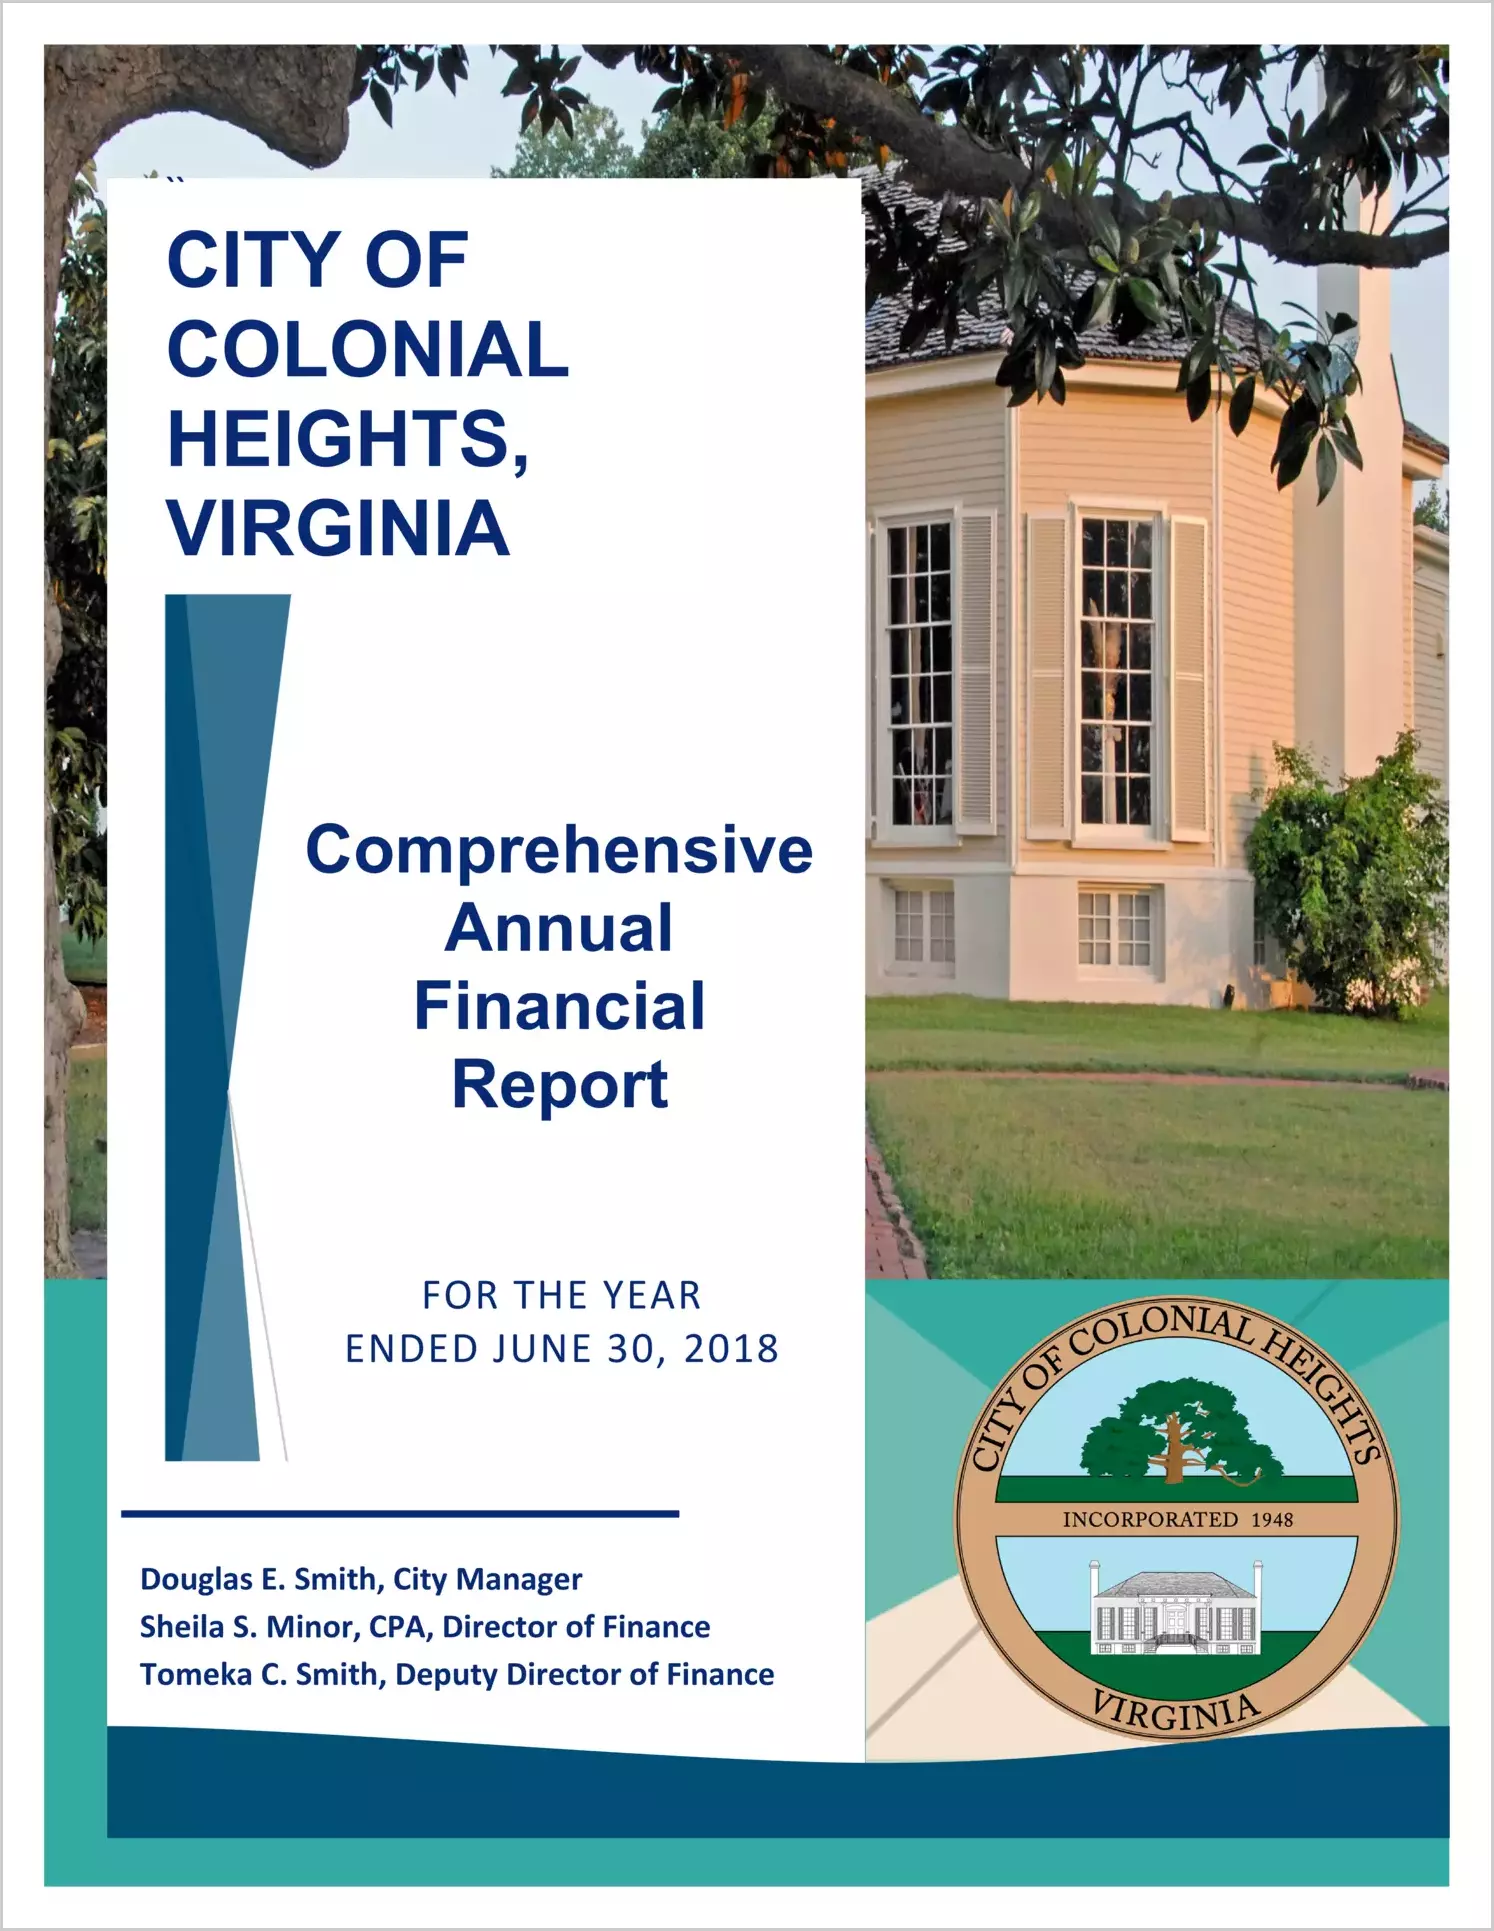 2018 Annual Financial Report for City of Colonial Heights